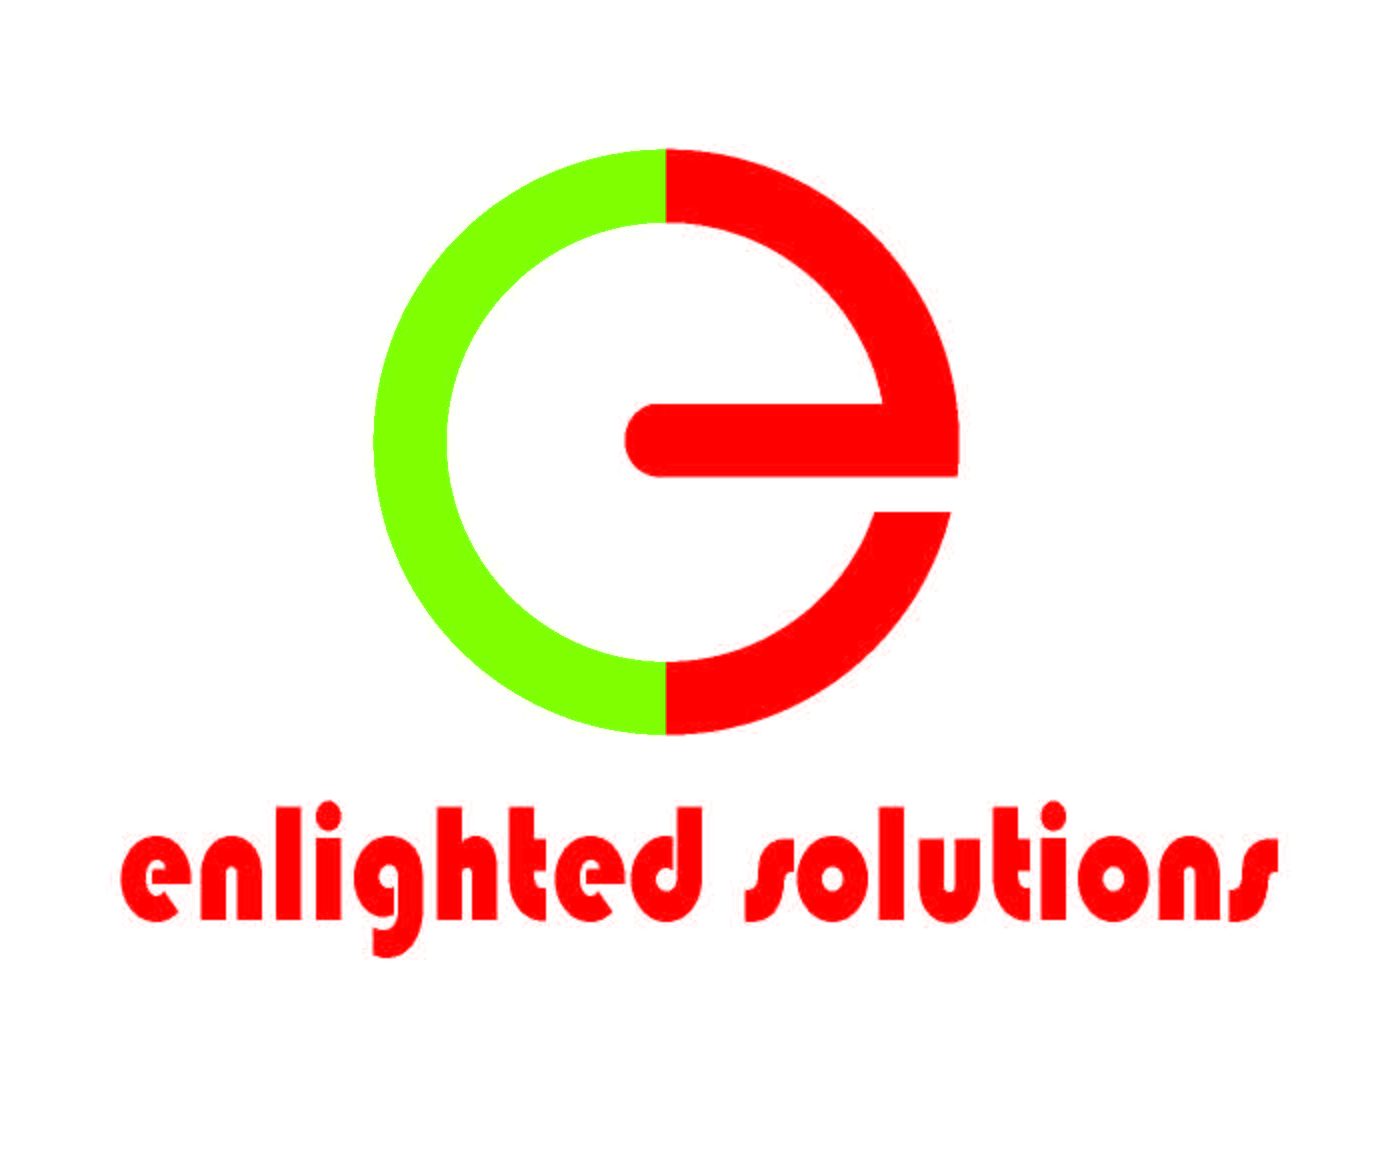 cropped-E-logo-New-fnl-030417-1.jpg - Enlighted Solutions Sdn. Bhd.